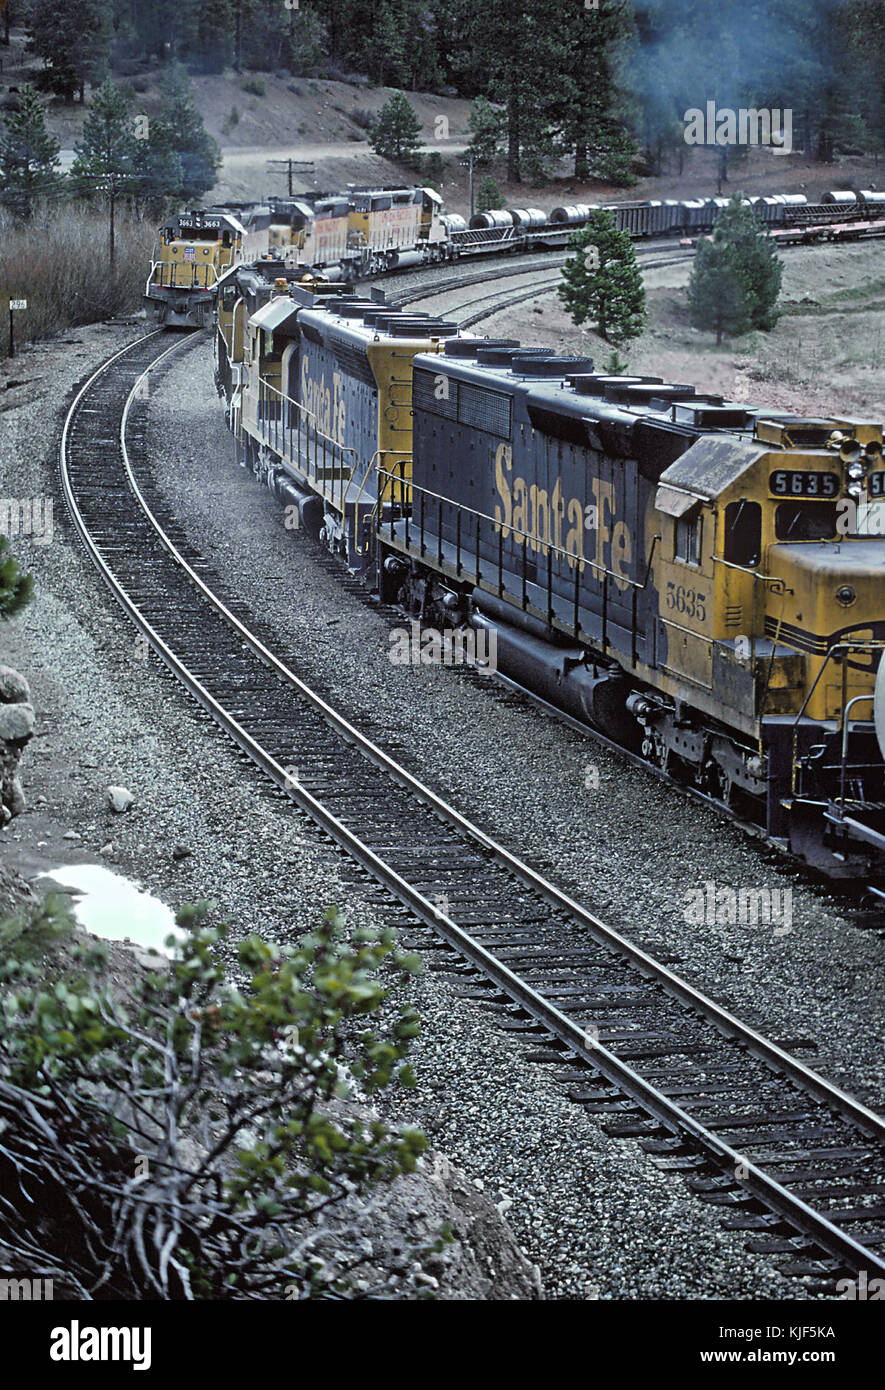 UP 3663 meet a AT&SF Detour on the WP, Spring Garden, CA in March 1983 (29518076556) Stock Photo